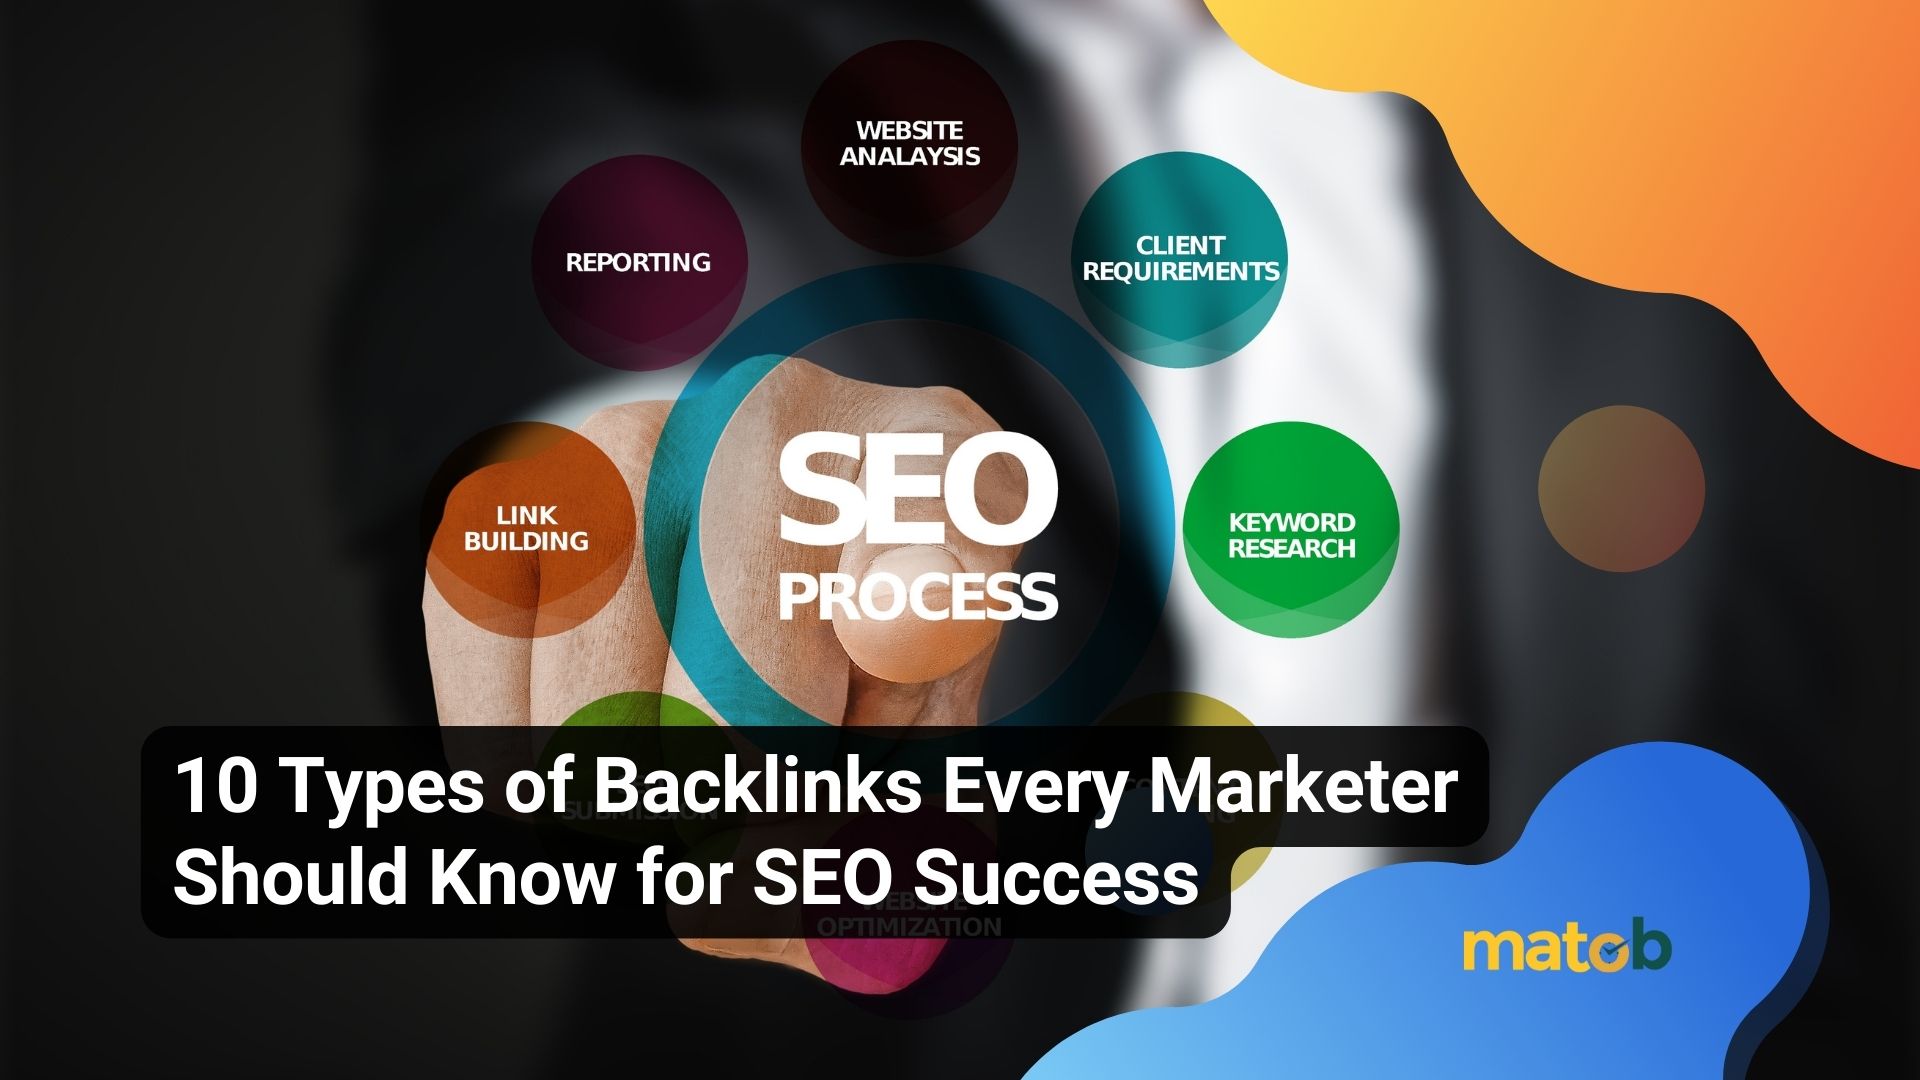 10 Types of Backlinks Every Marketer Should Know for SEO Success